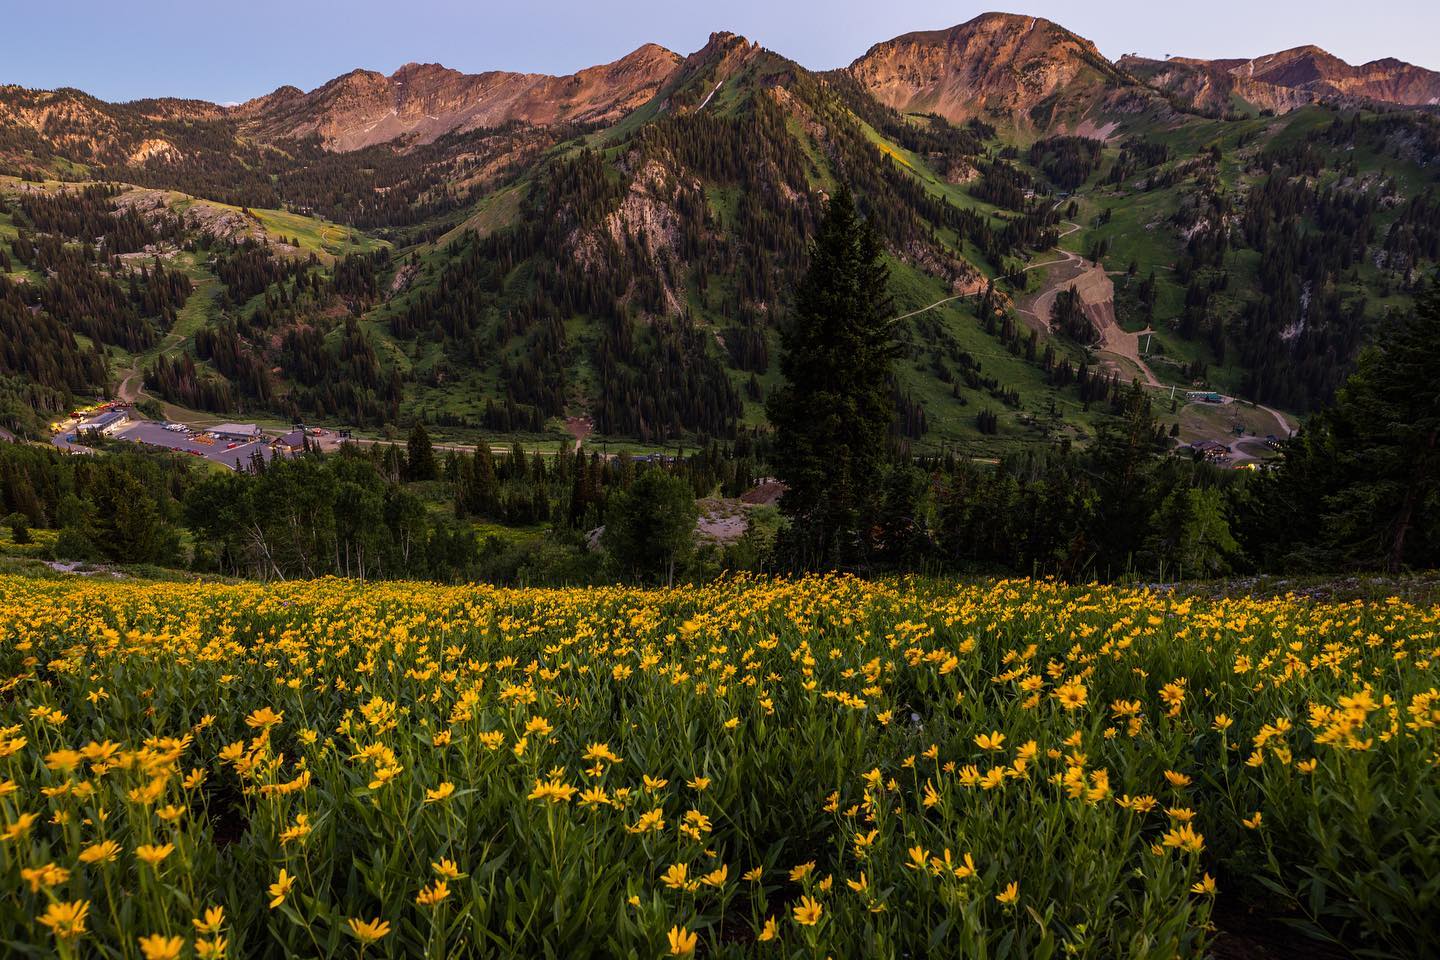 Wildflowers at Alta